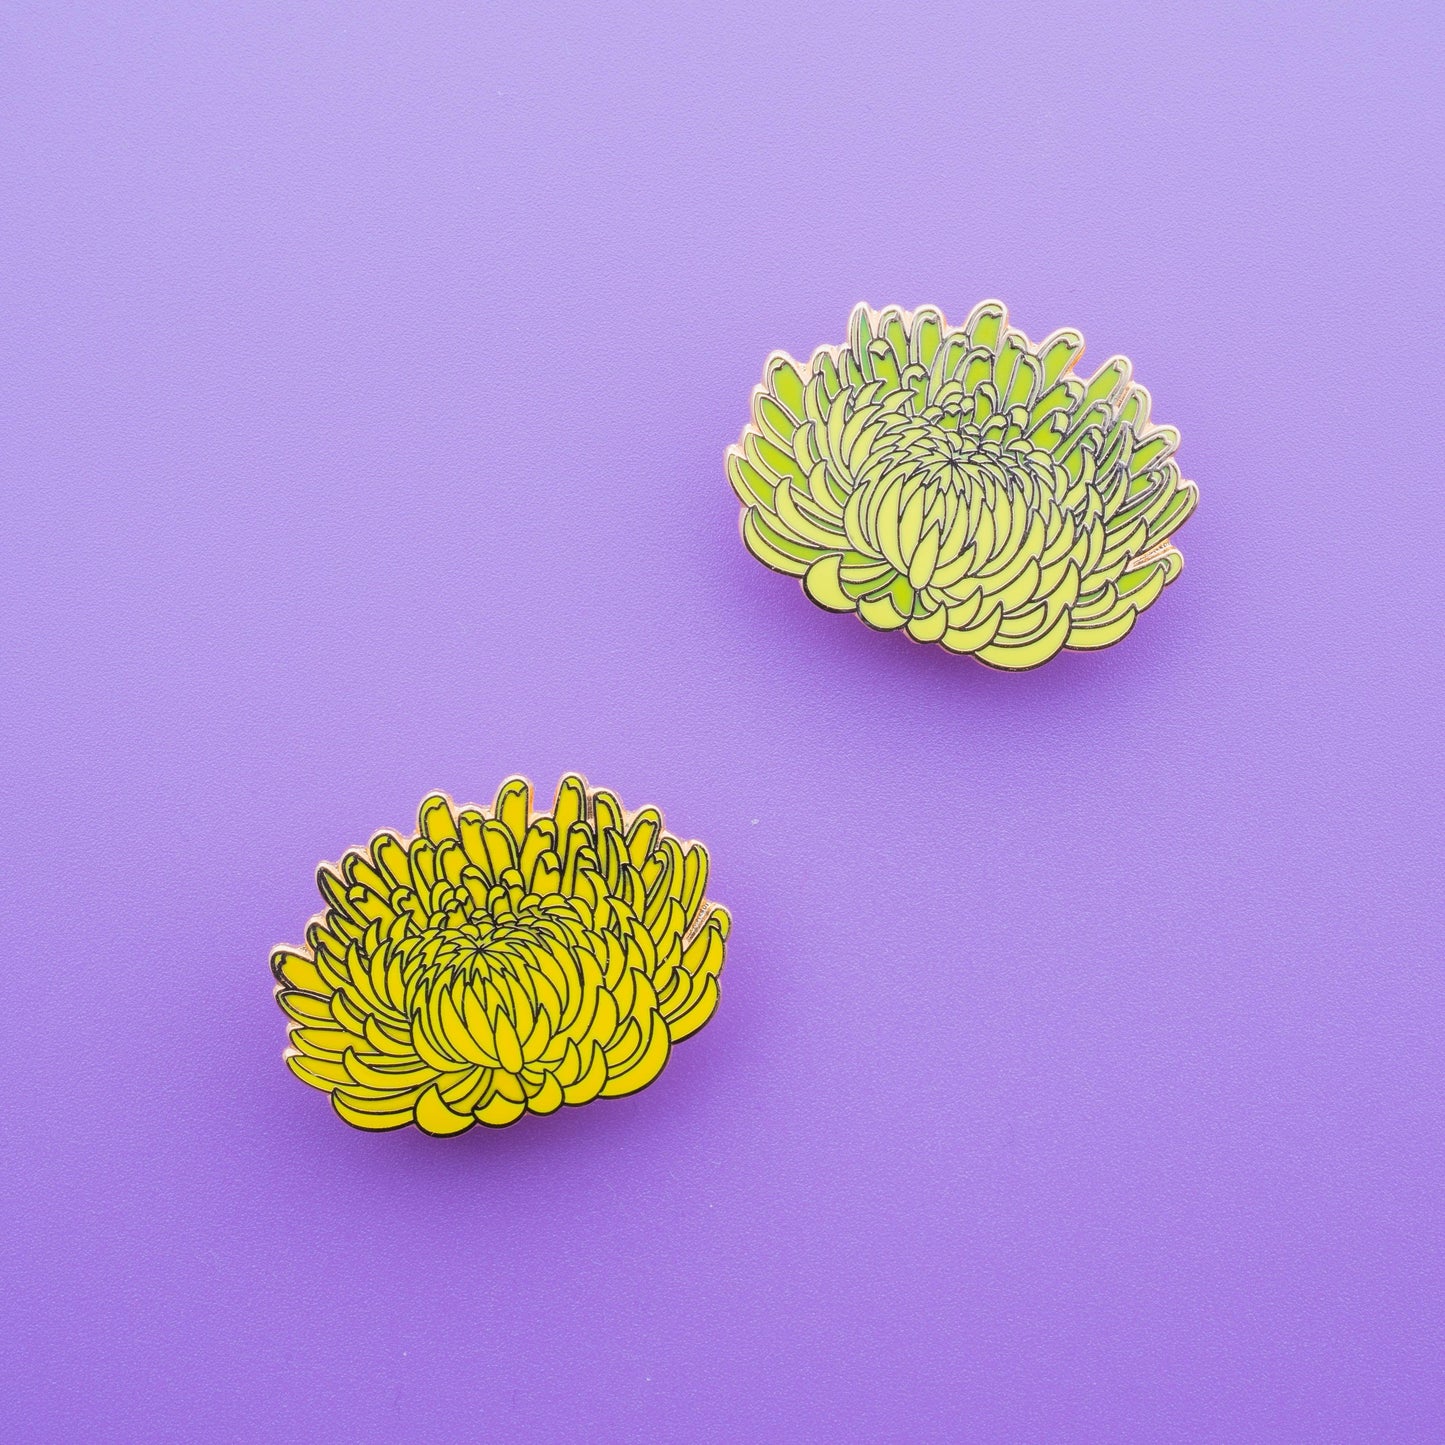 2 beautifully detailed crysanthemum enamel pins, one yellow and one green yellow